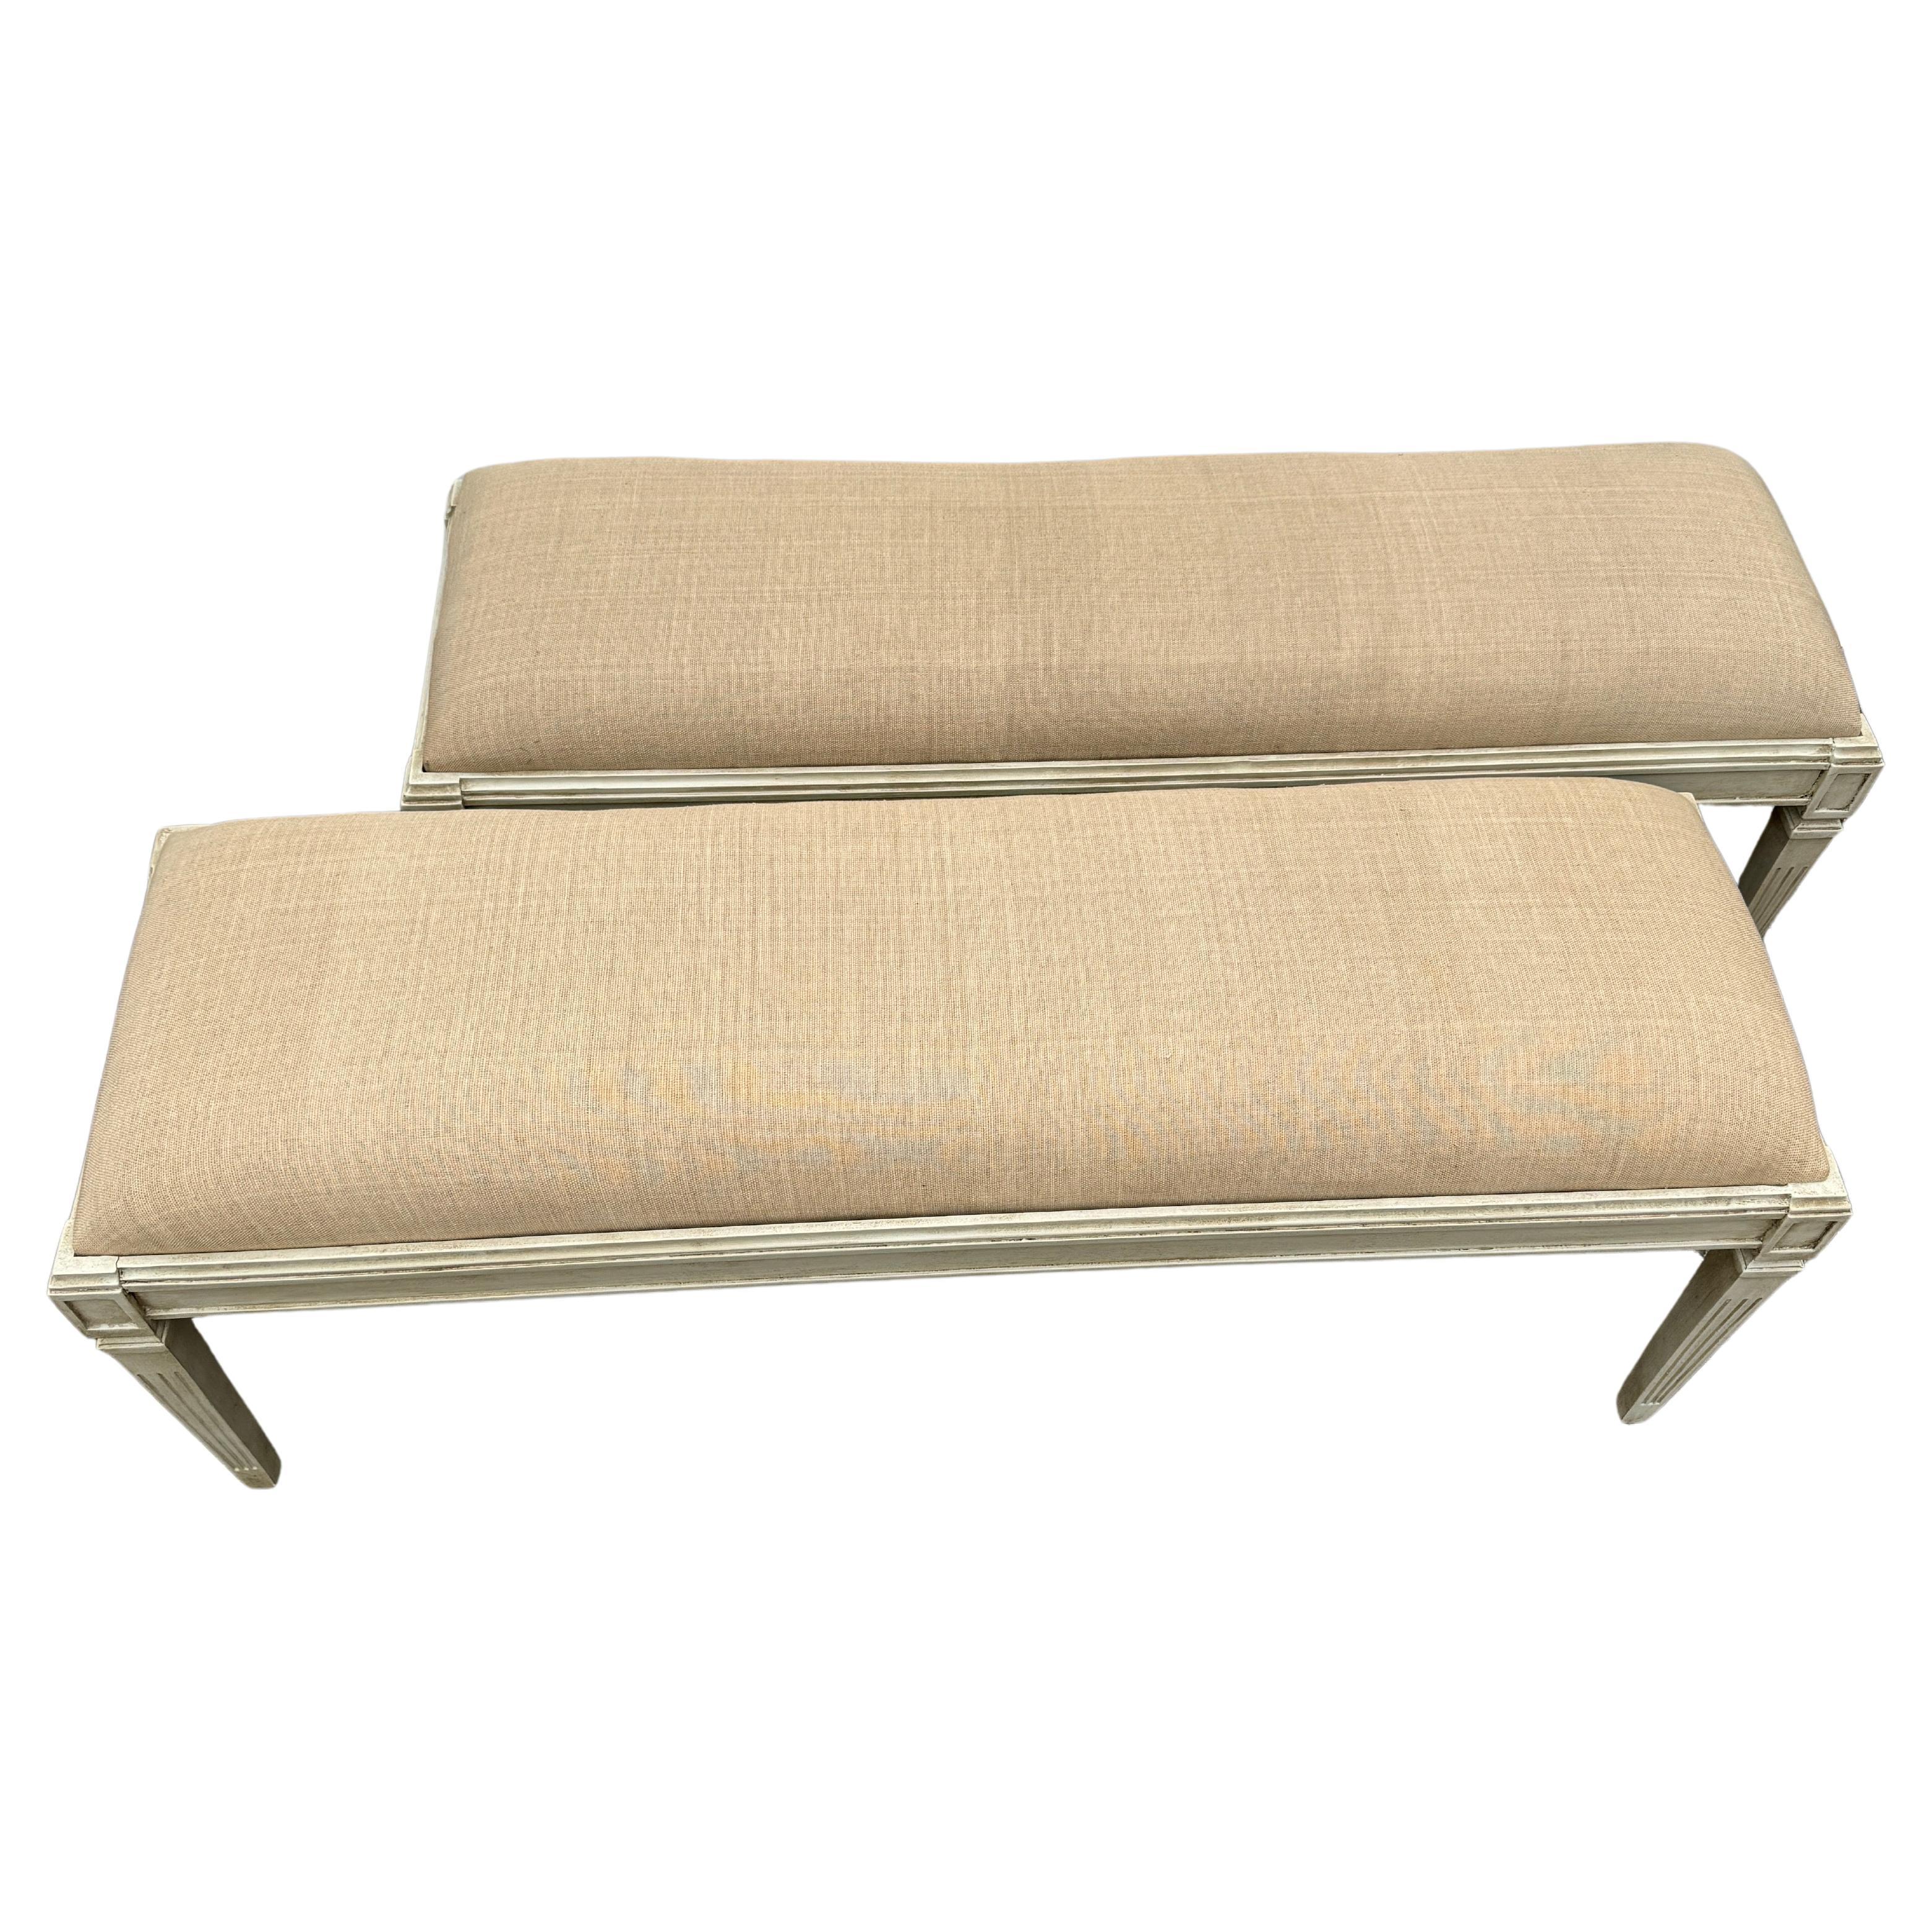 Swedish Gustavian Style Painted Upholstered Benches, A Wide Pair

Hand painted and hand distressed wood benches fully upholstered in a neutral linen textile. Wonderful additions to any style home, used formally or informally in an entrance area,